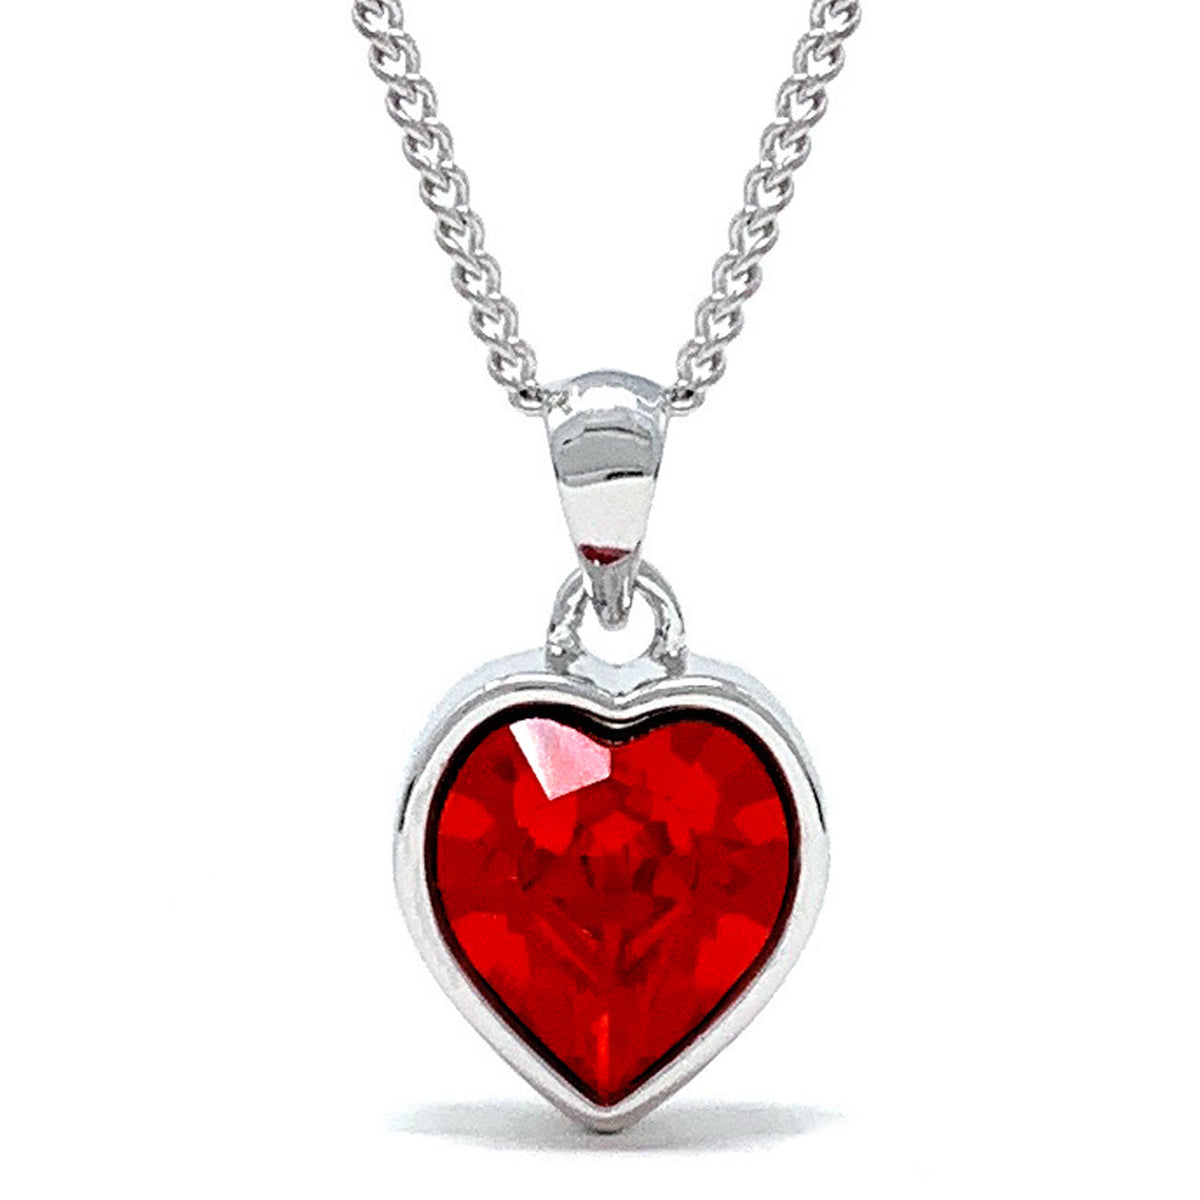 Lucia Pendant Necklace with Red Light Siam Heart Crystals from Swarovski Silver Toned Rhodium Plated - Ed Heart